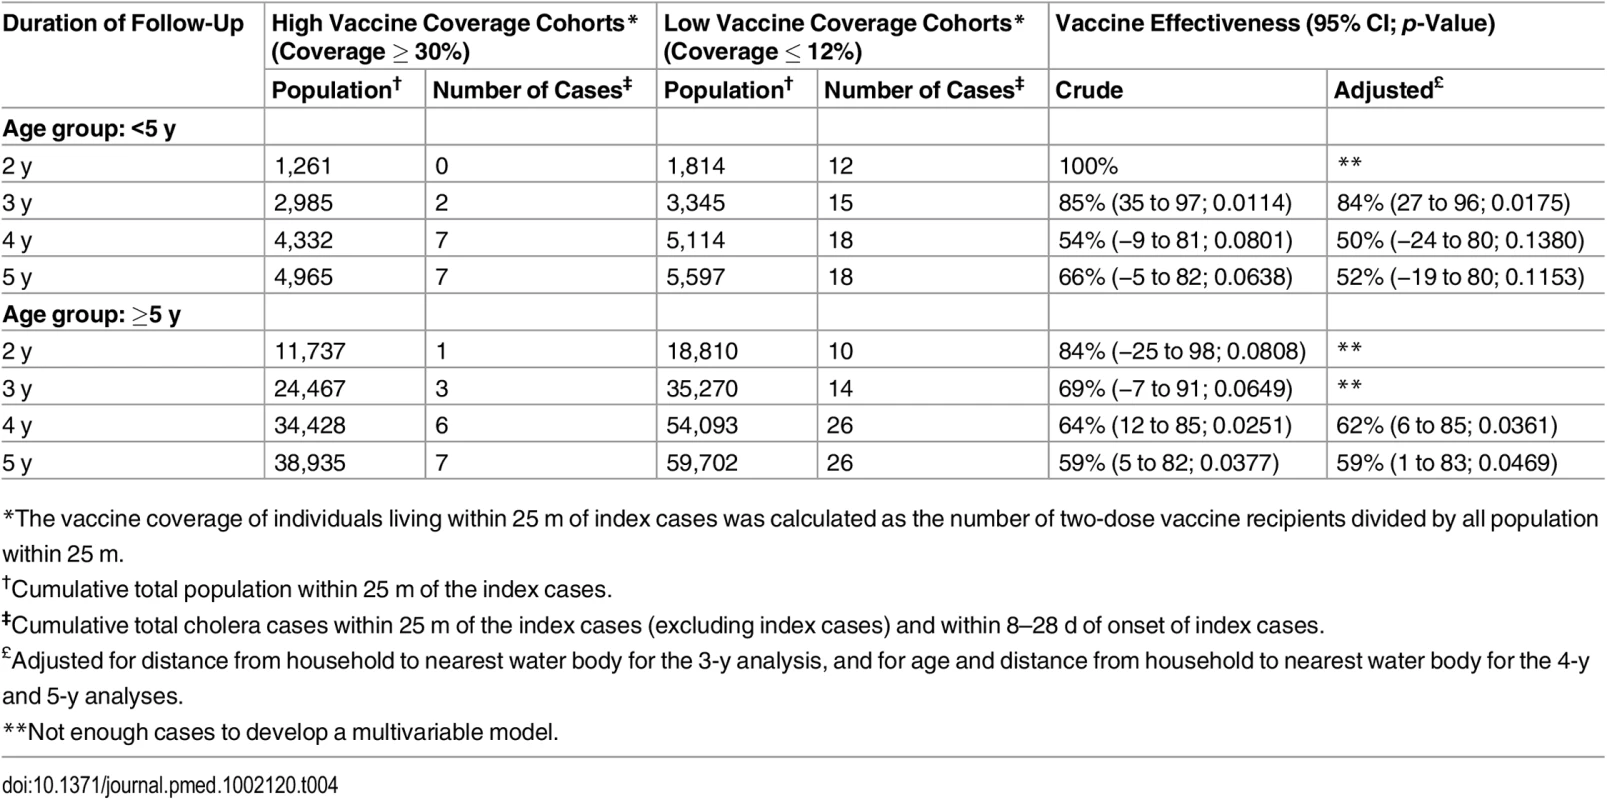 Indirect vaccine effectiveness against cholera using ring vaccination strategy, by age group of the index case.